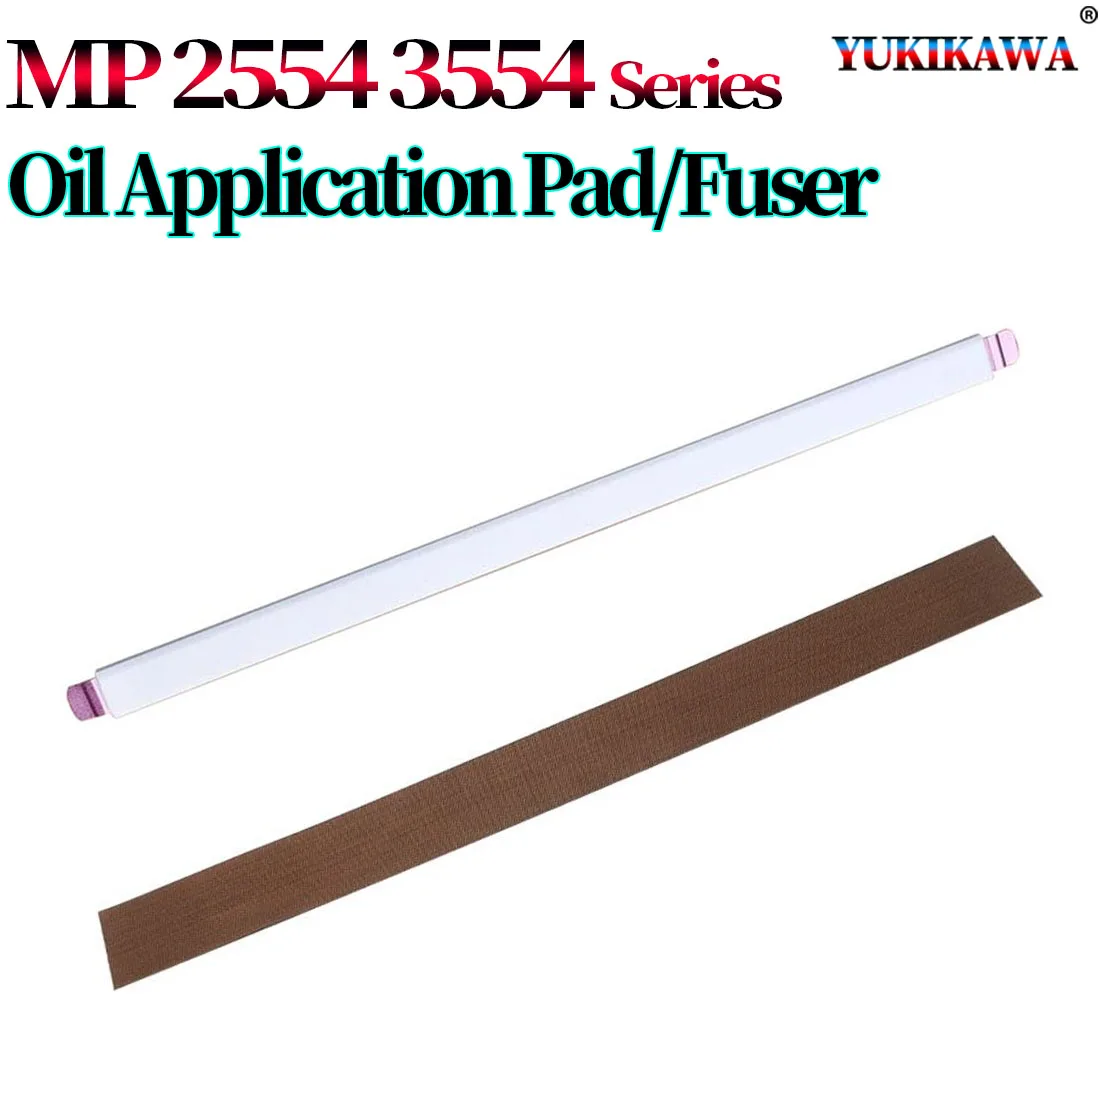 

Oil Application Pad/Fuser Oil Pad For Use in Ricoh MP 2554 2054 3054 3554 4054 5054 6054SP 2555 3055 3555 4055SP 5055SP 6055SP